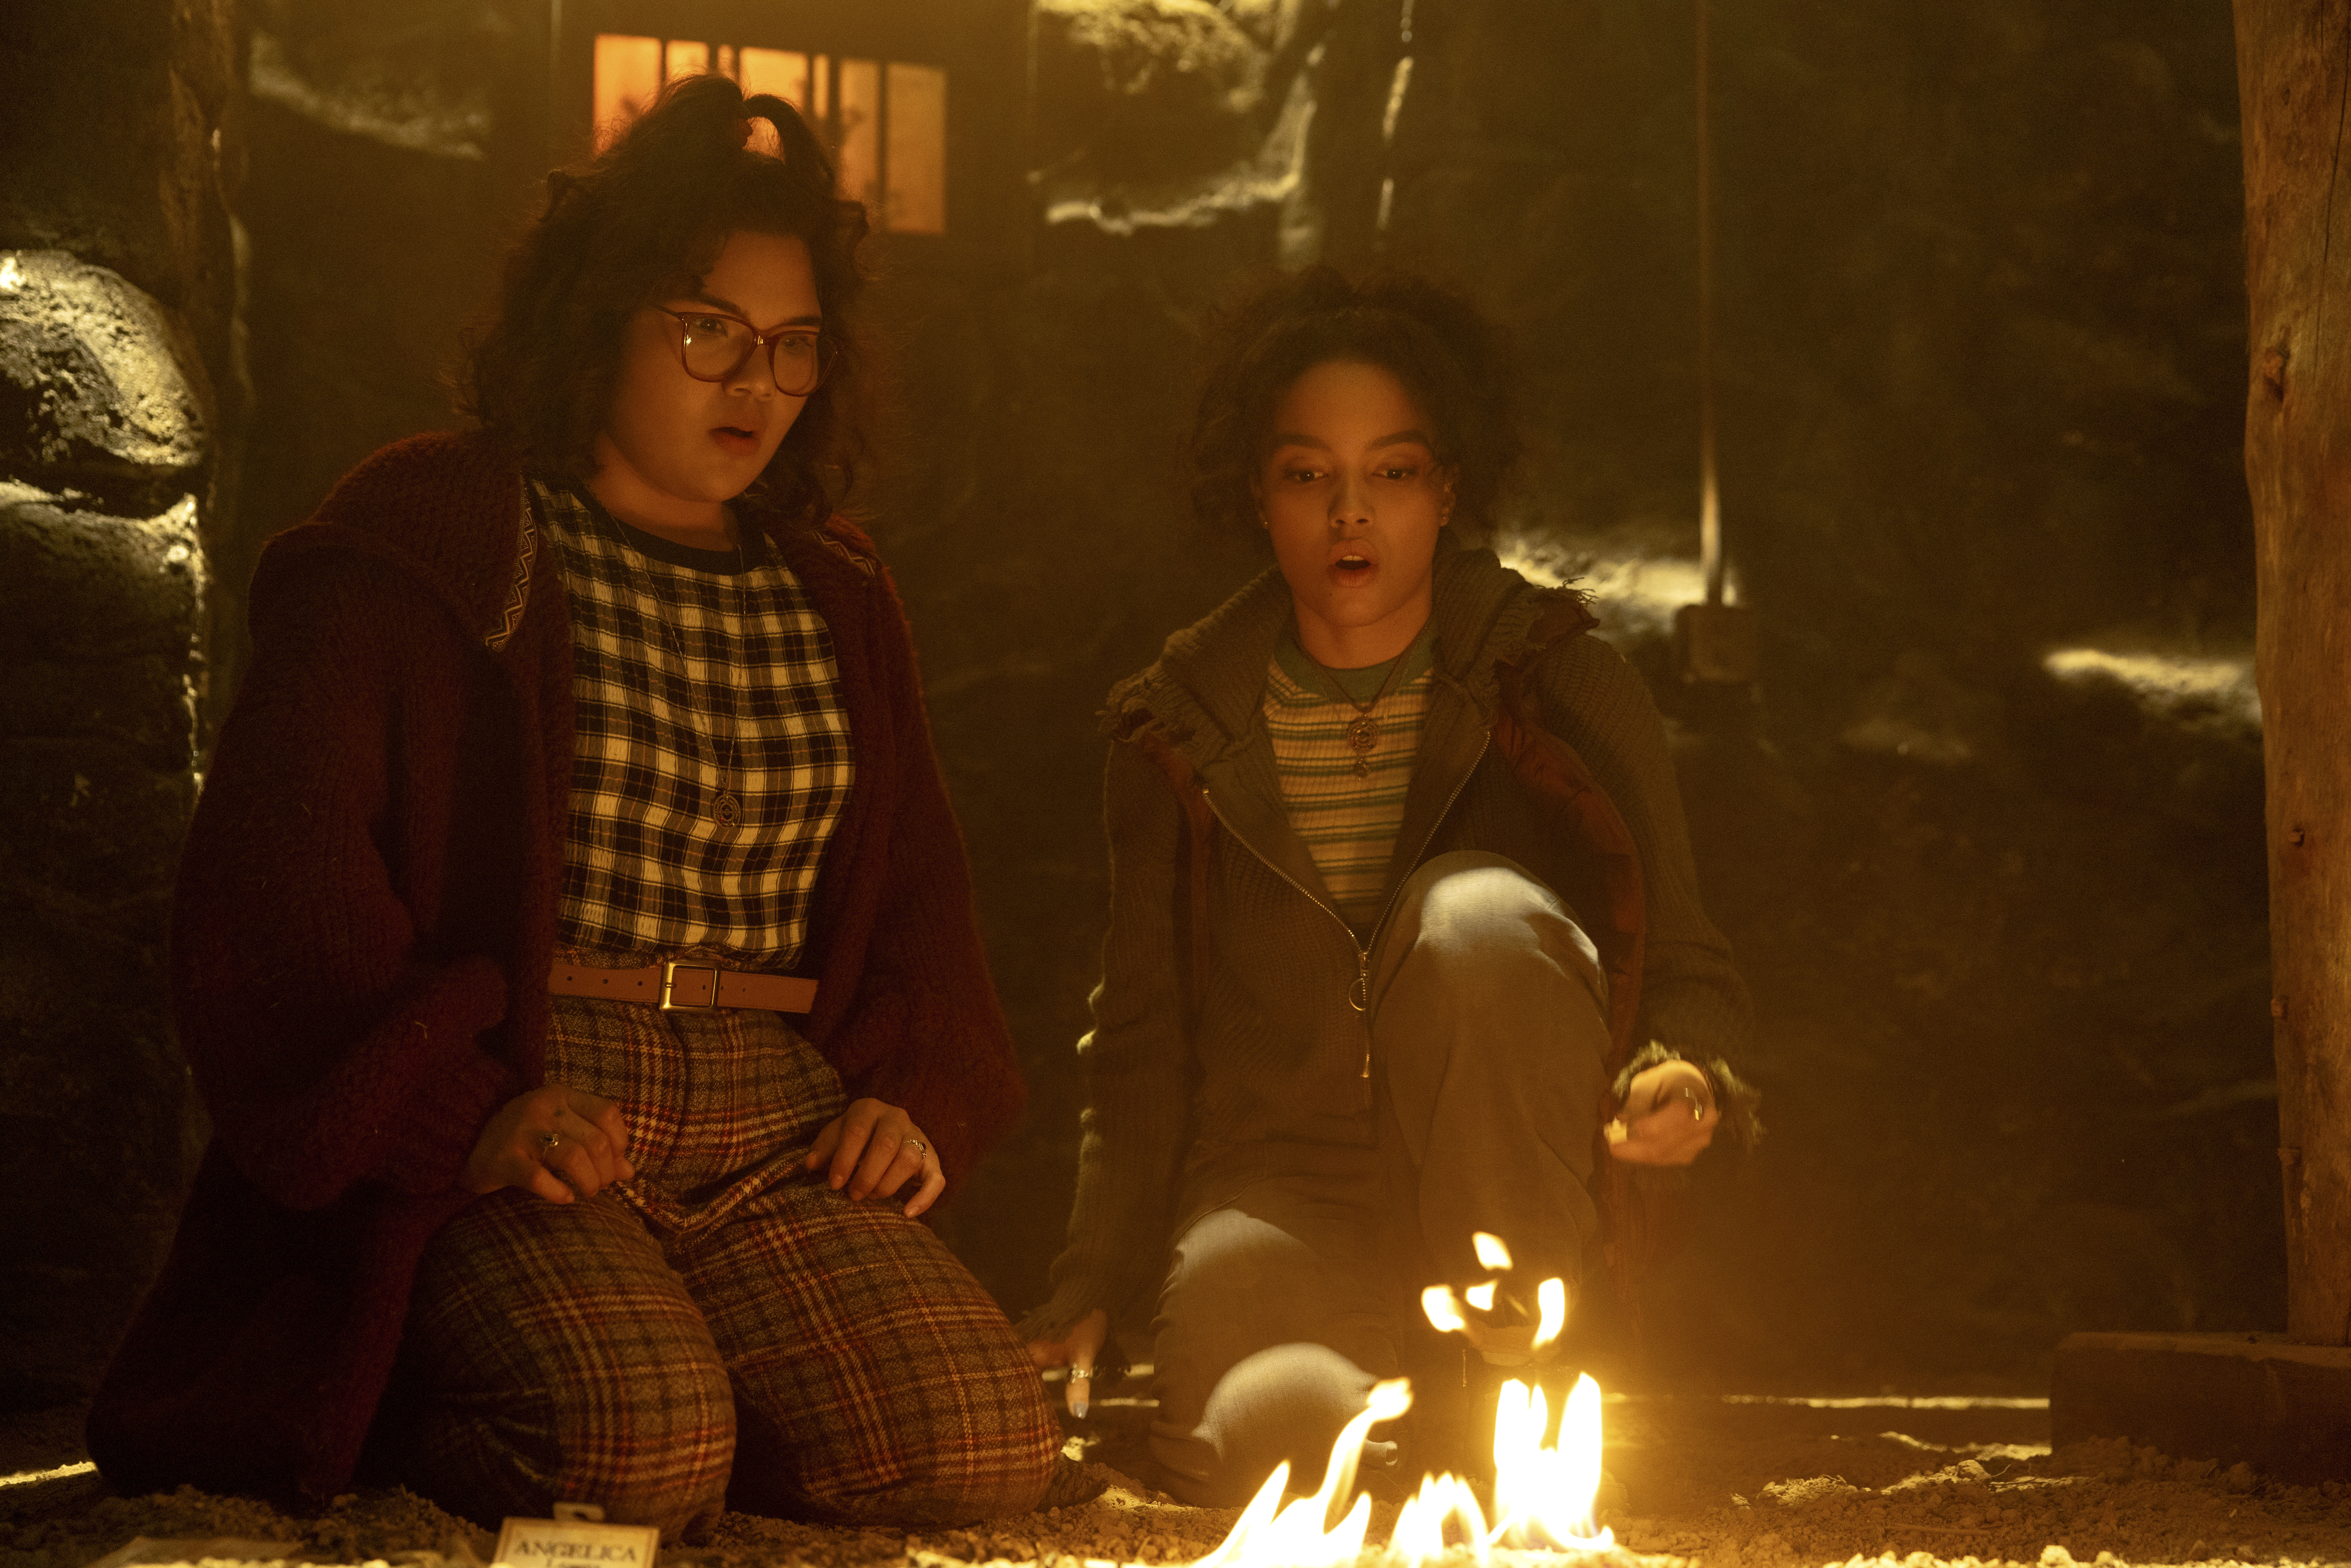 (L-R): Belissa Escobedo as Izzy and Whitney Peak as Becca in HOCUS POCUS 2, exclusively on Disney+. Photo by Matt Kennedy. © 2022 Disney Enterprises, Inc. All Rights Reserved.